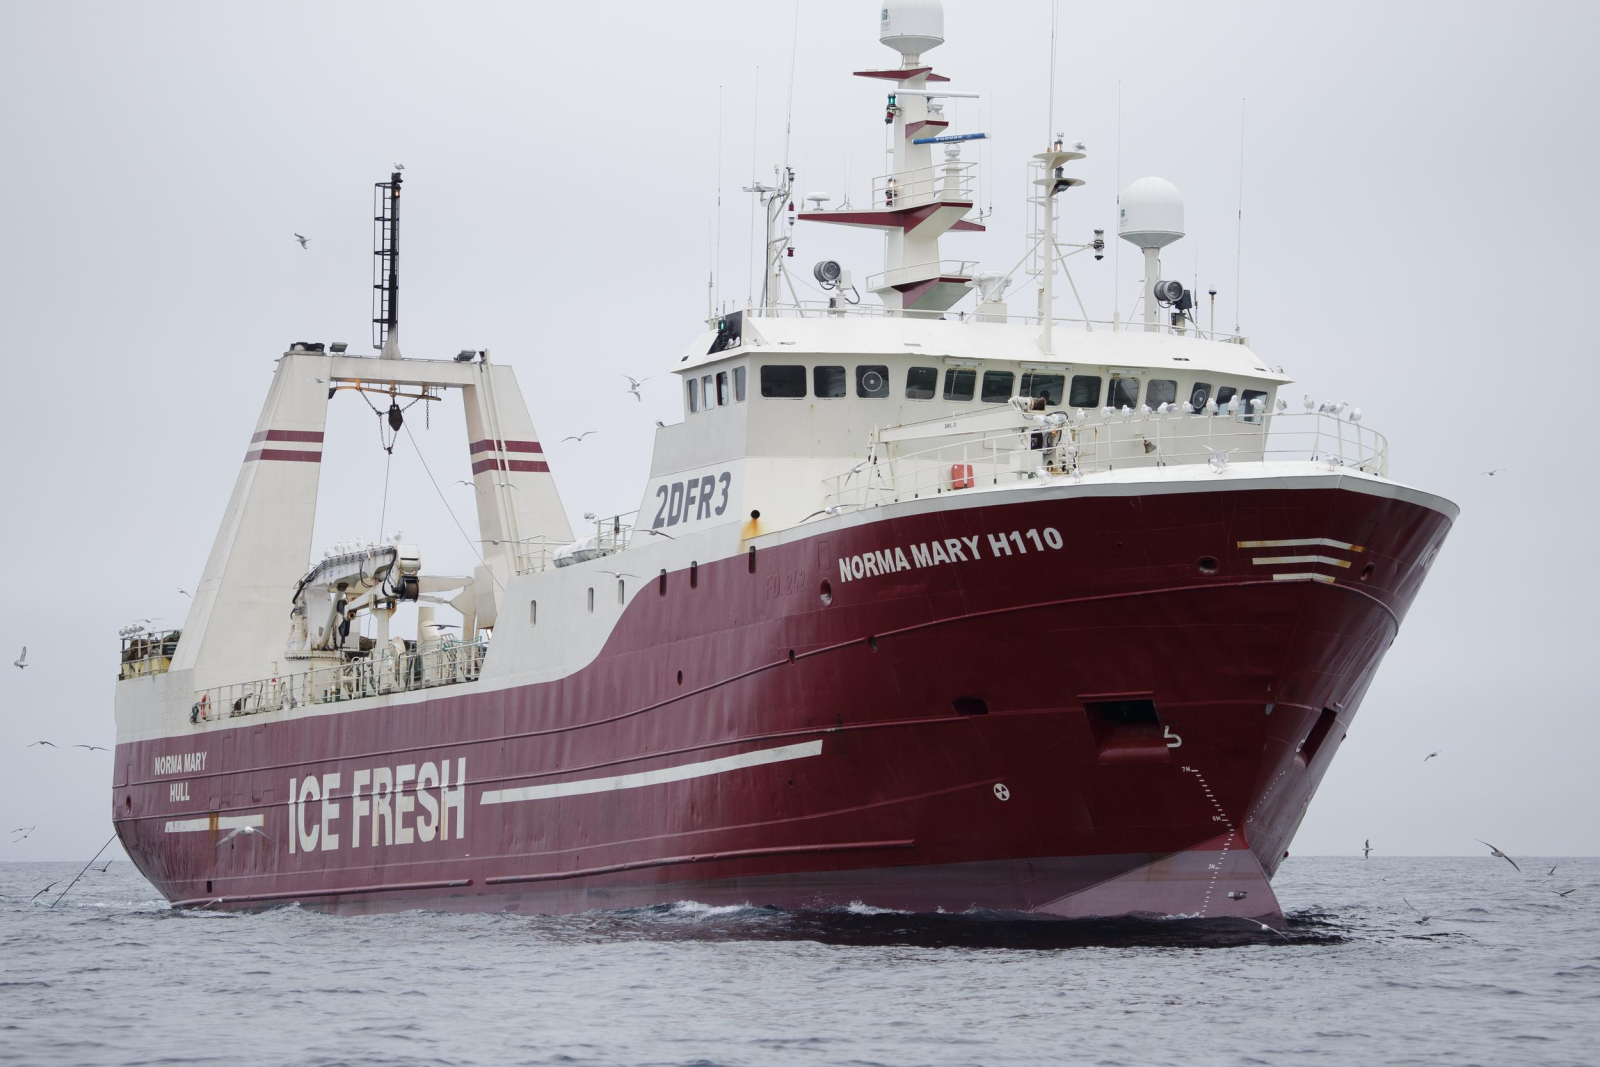 Trawler Norma Mary in the Barents Sea. Photo courtesy of Nick Cobbing / Greenpeace